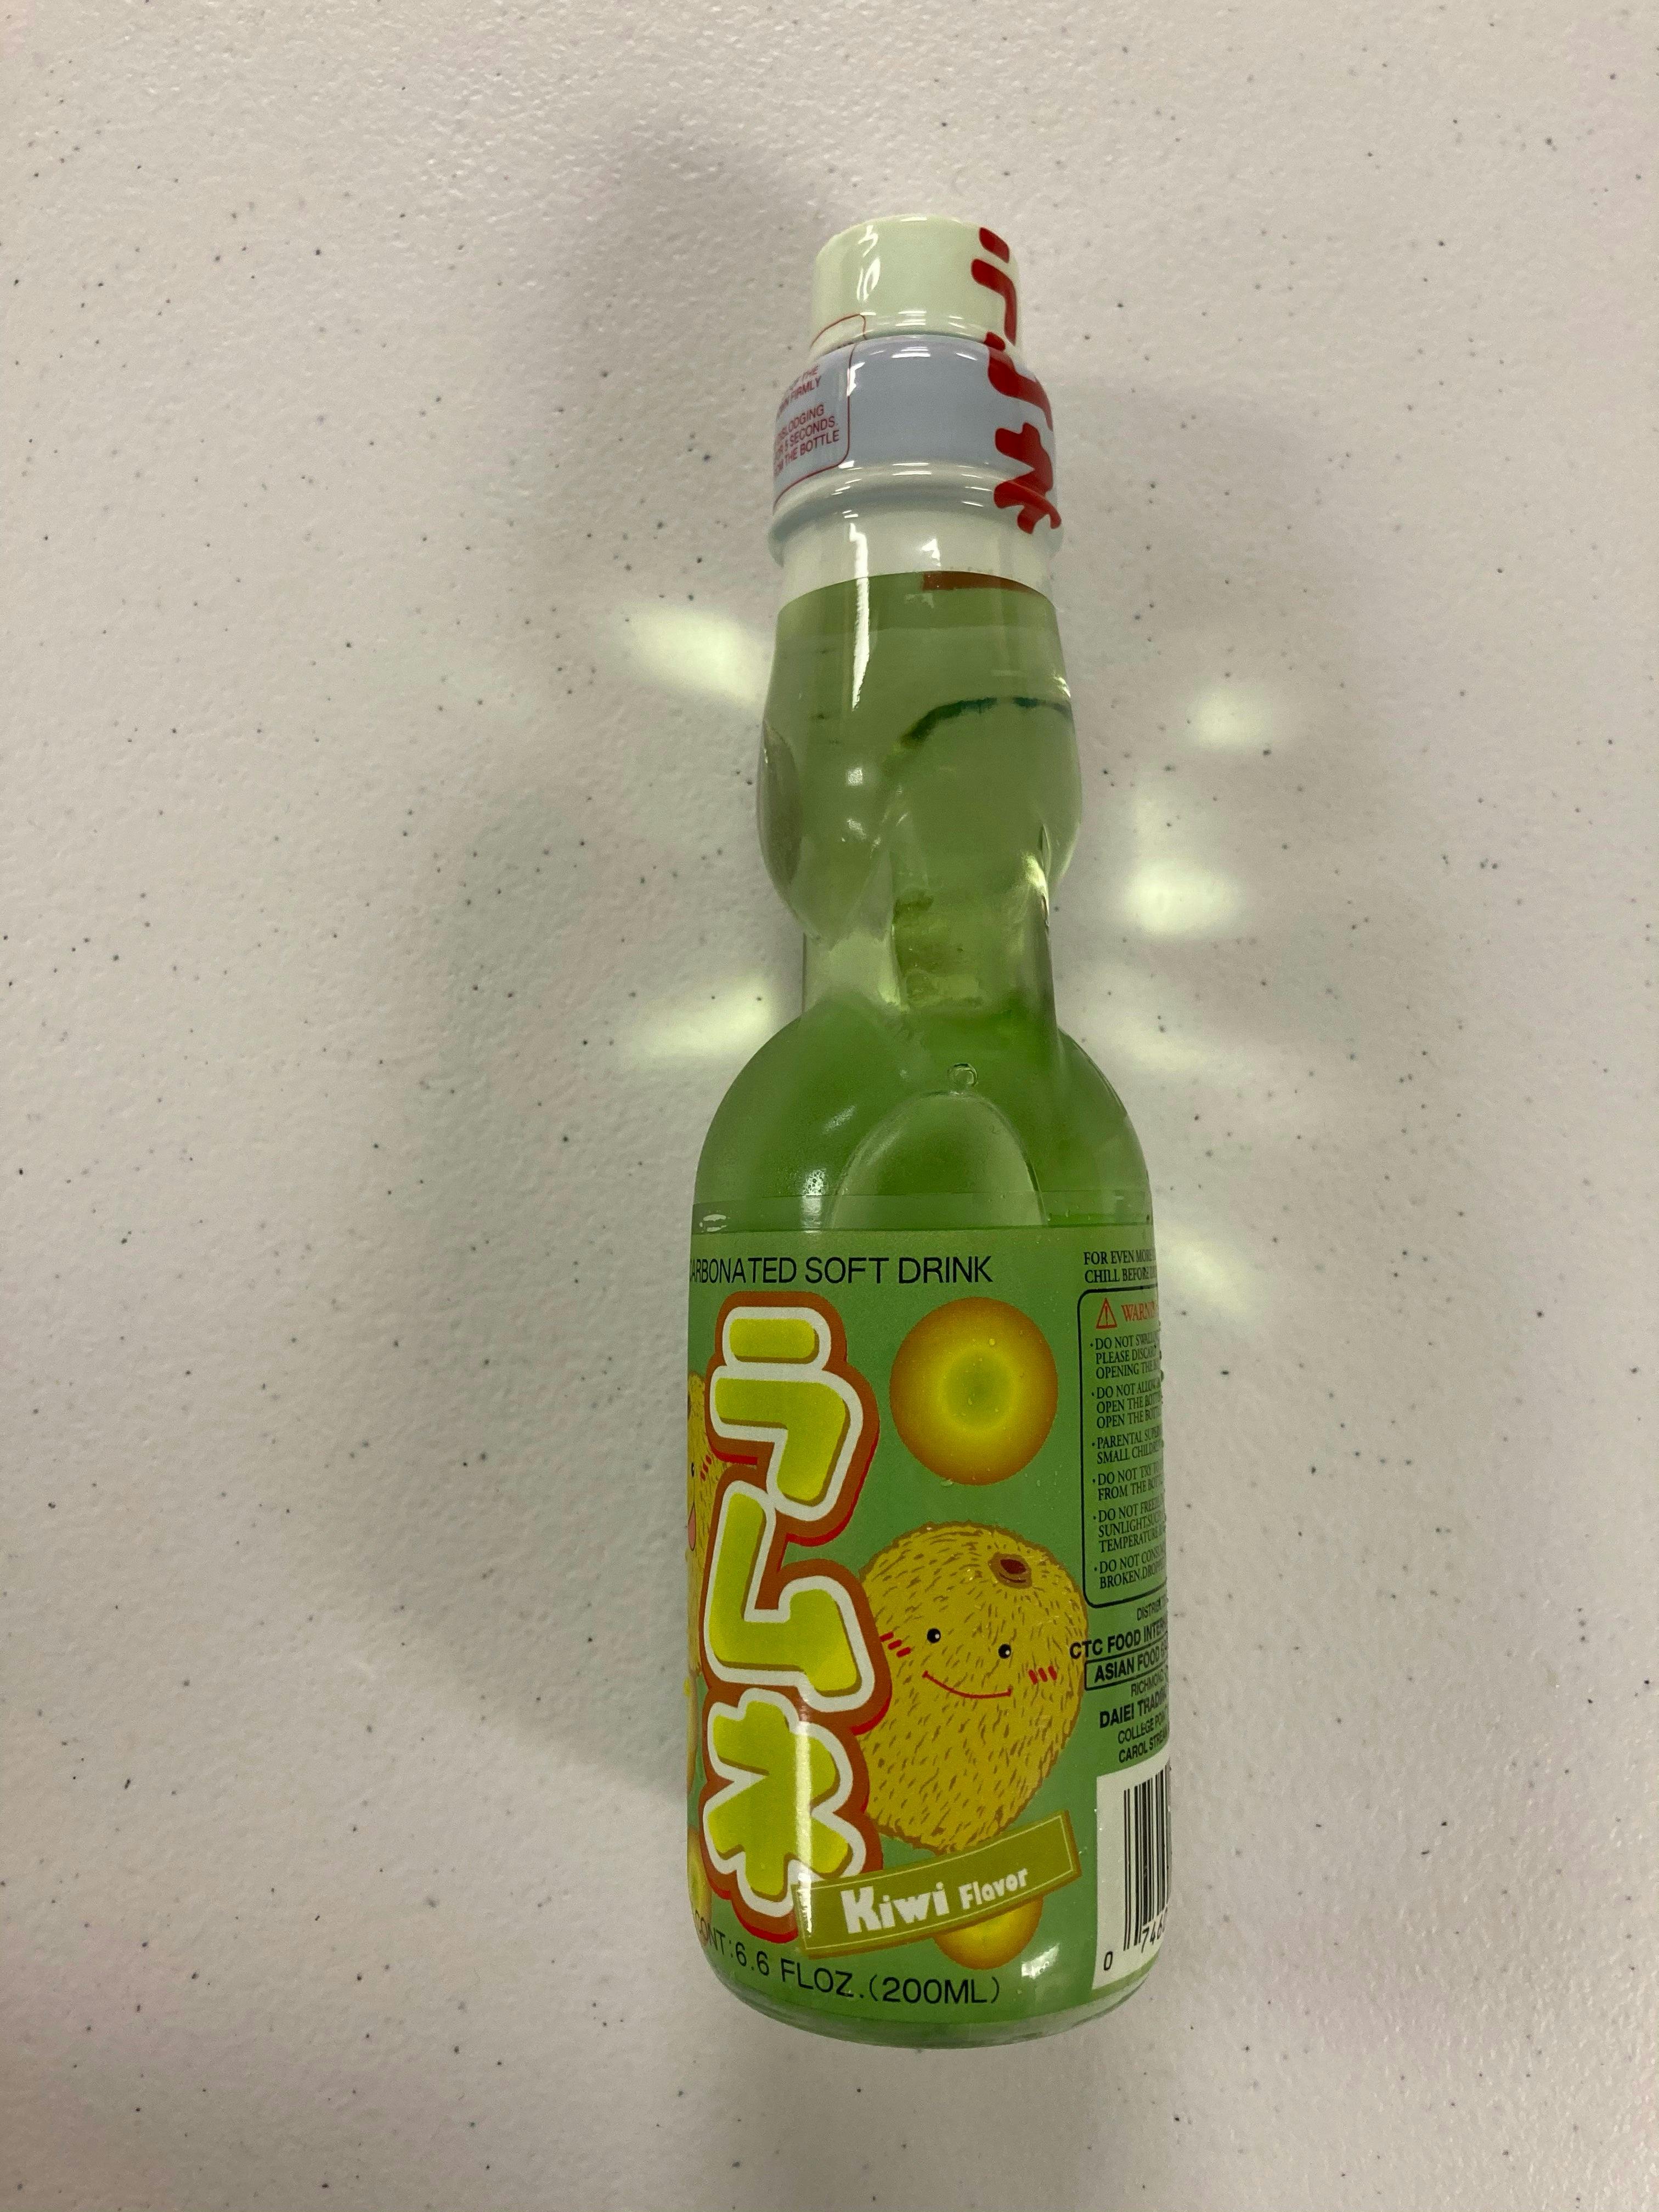 Kiwi-Flavored Carbonated Soft Drink